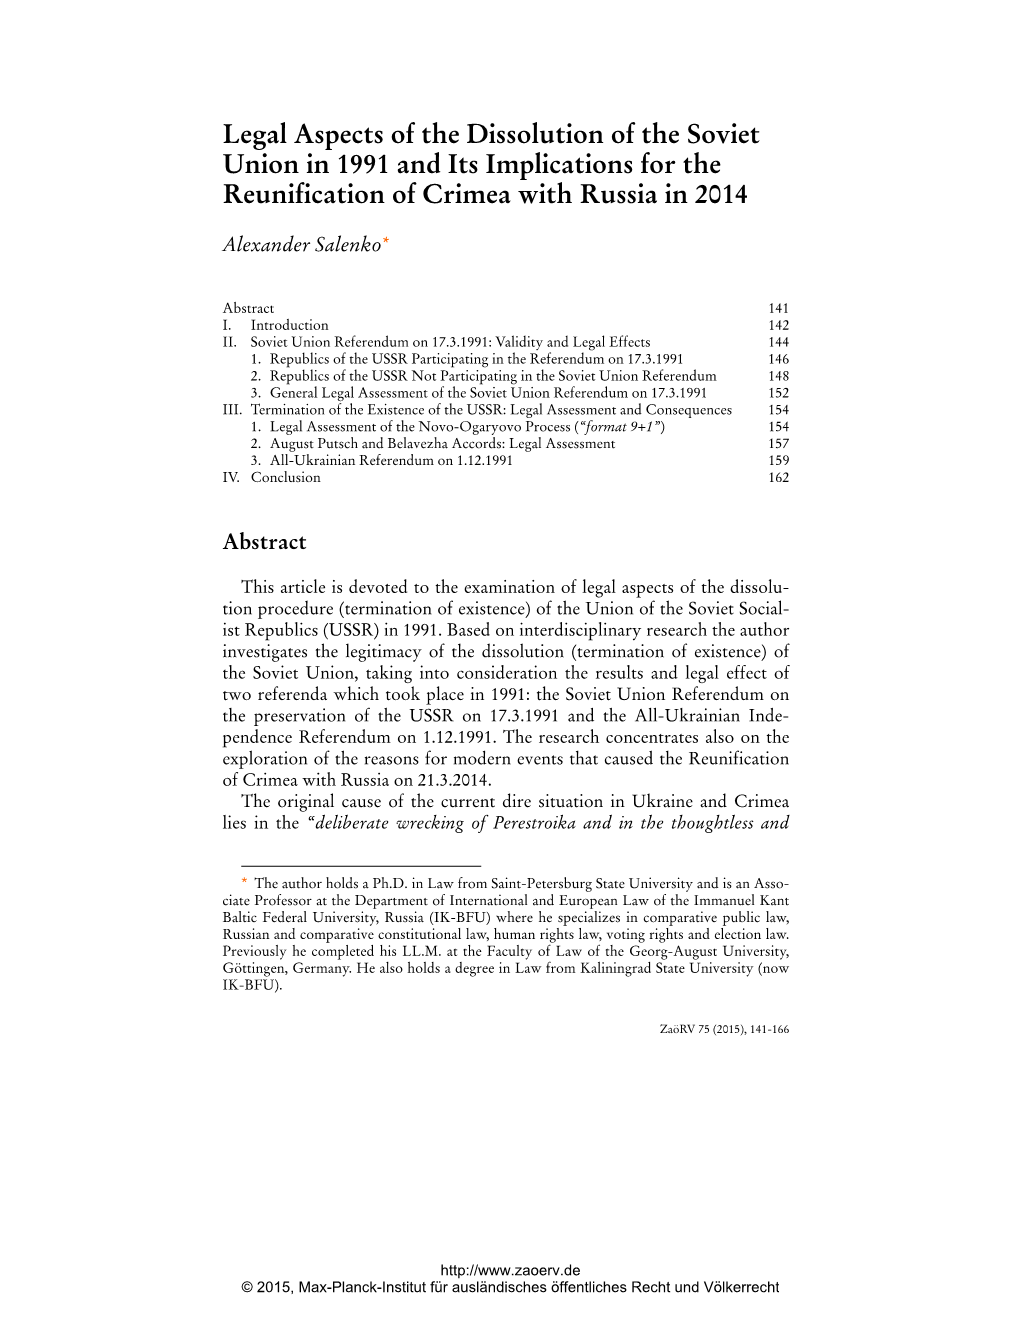 Legal Aspects of the Dissolution of the Soviet Union in 1991 and Its Implications for the Reunification of Crimea with Russia in 2014